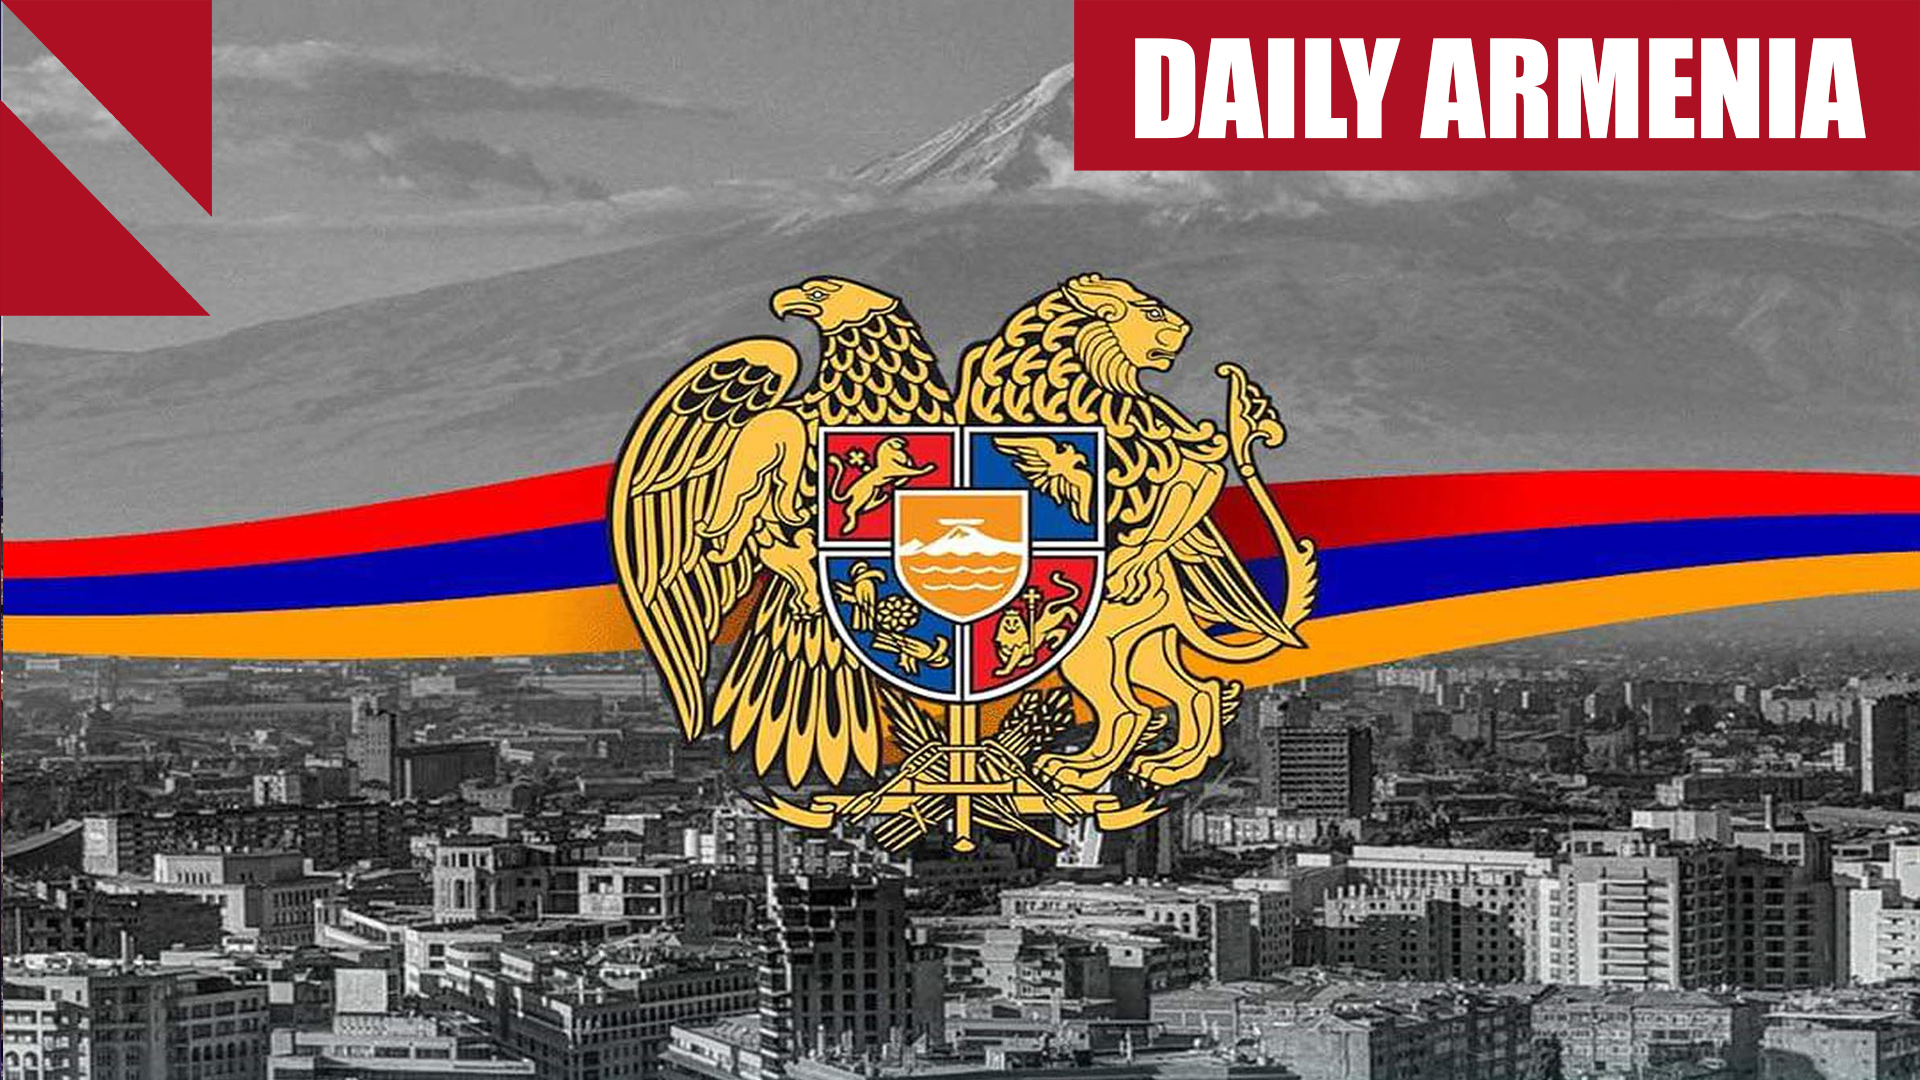 Another Armenian official endorses changing Armenia’s constitution